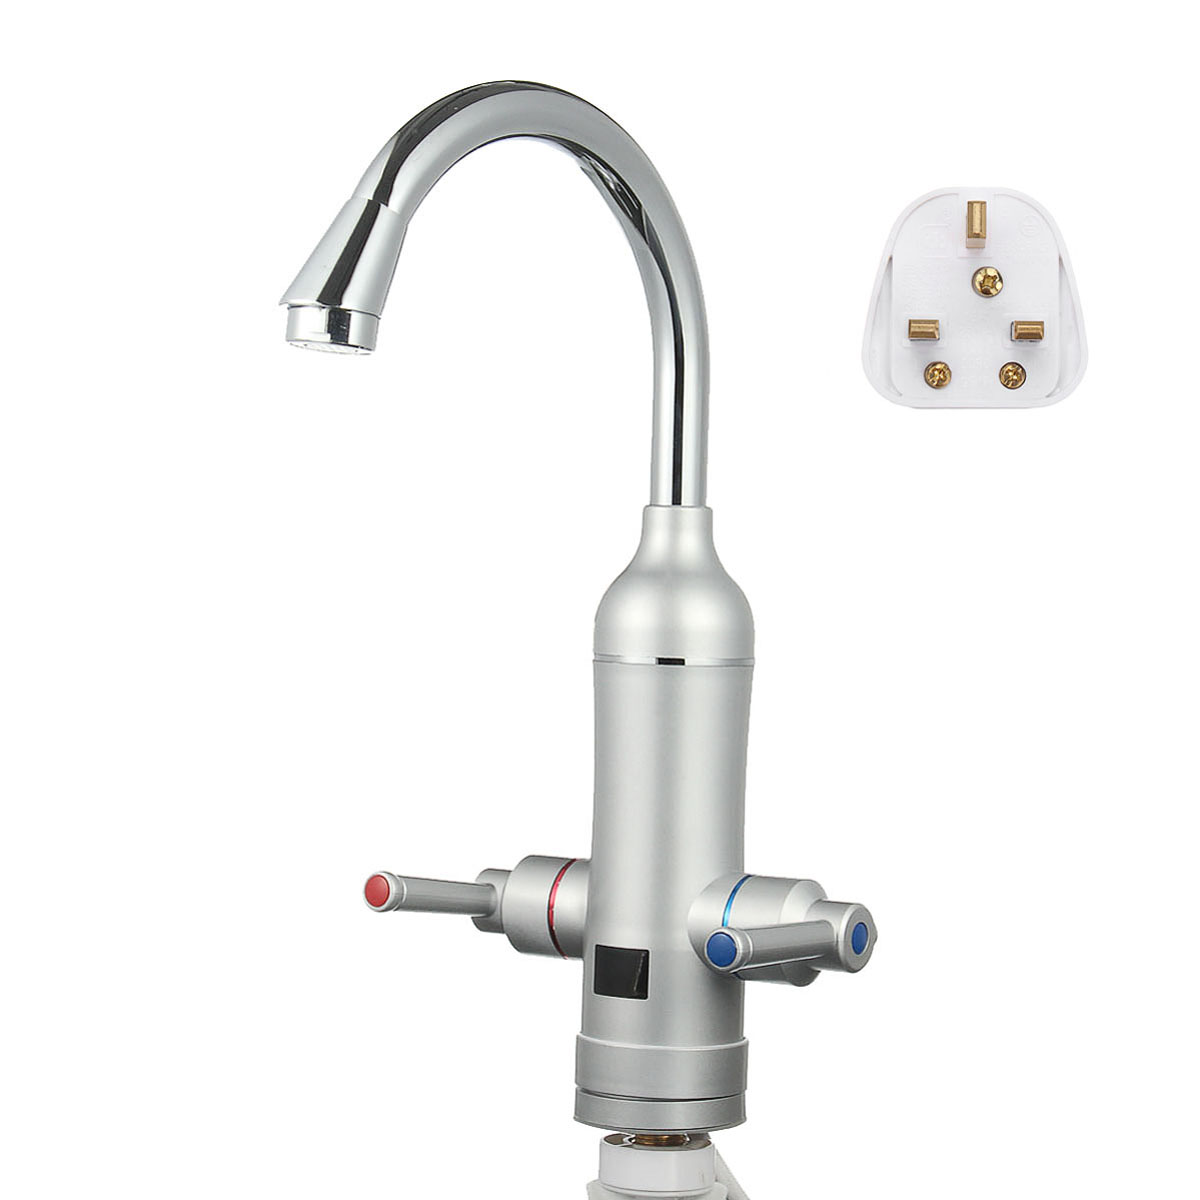 220V-3000W-Instant-Electric-Faucet-Tap-360deg-Rotated-Water-Heater-HotCold-Mixer-LED-Digital-Display-1345592